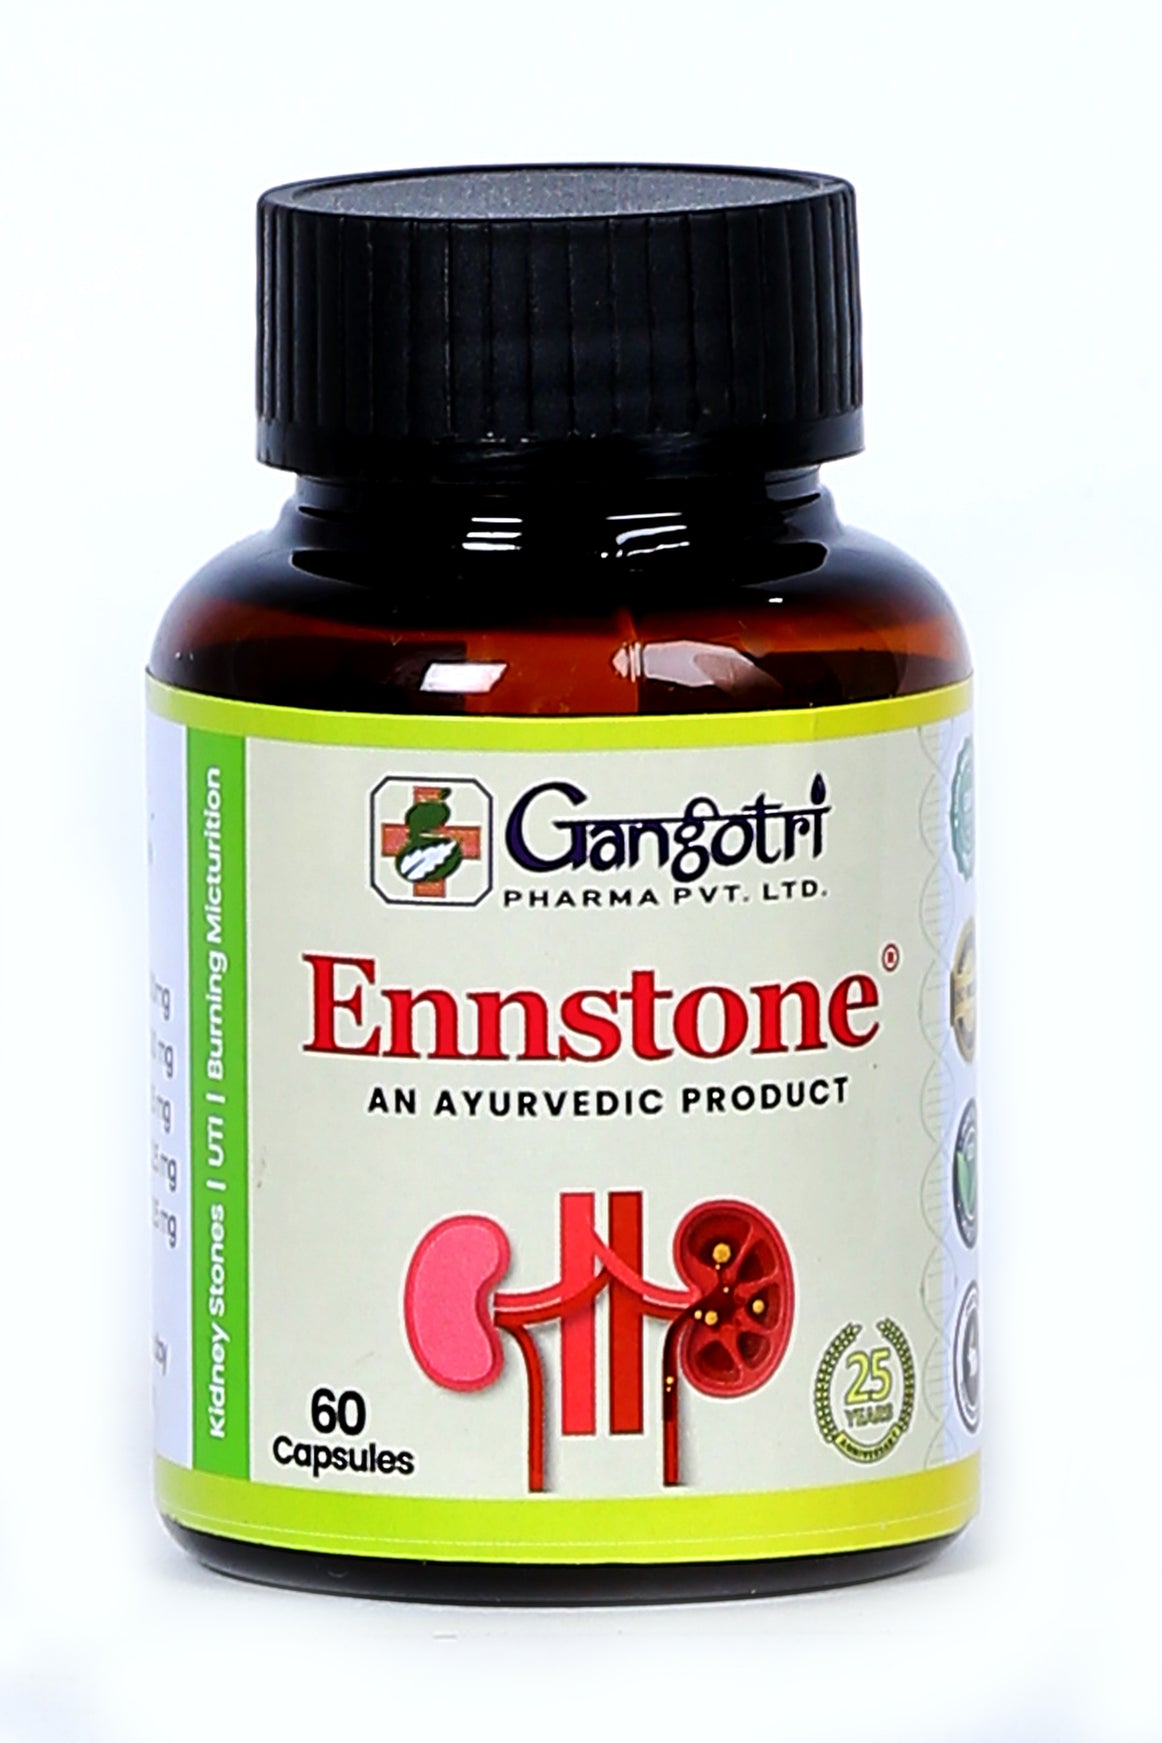 ENNSTONE: Find Rapid Relief and Break Free from all types of Kidney and Urinary issues